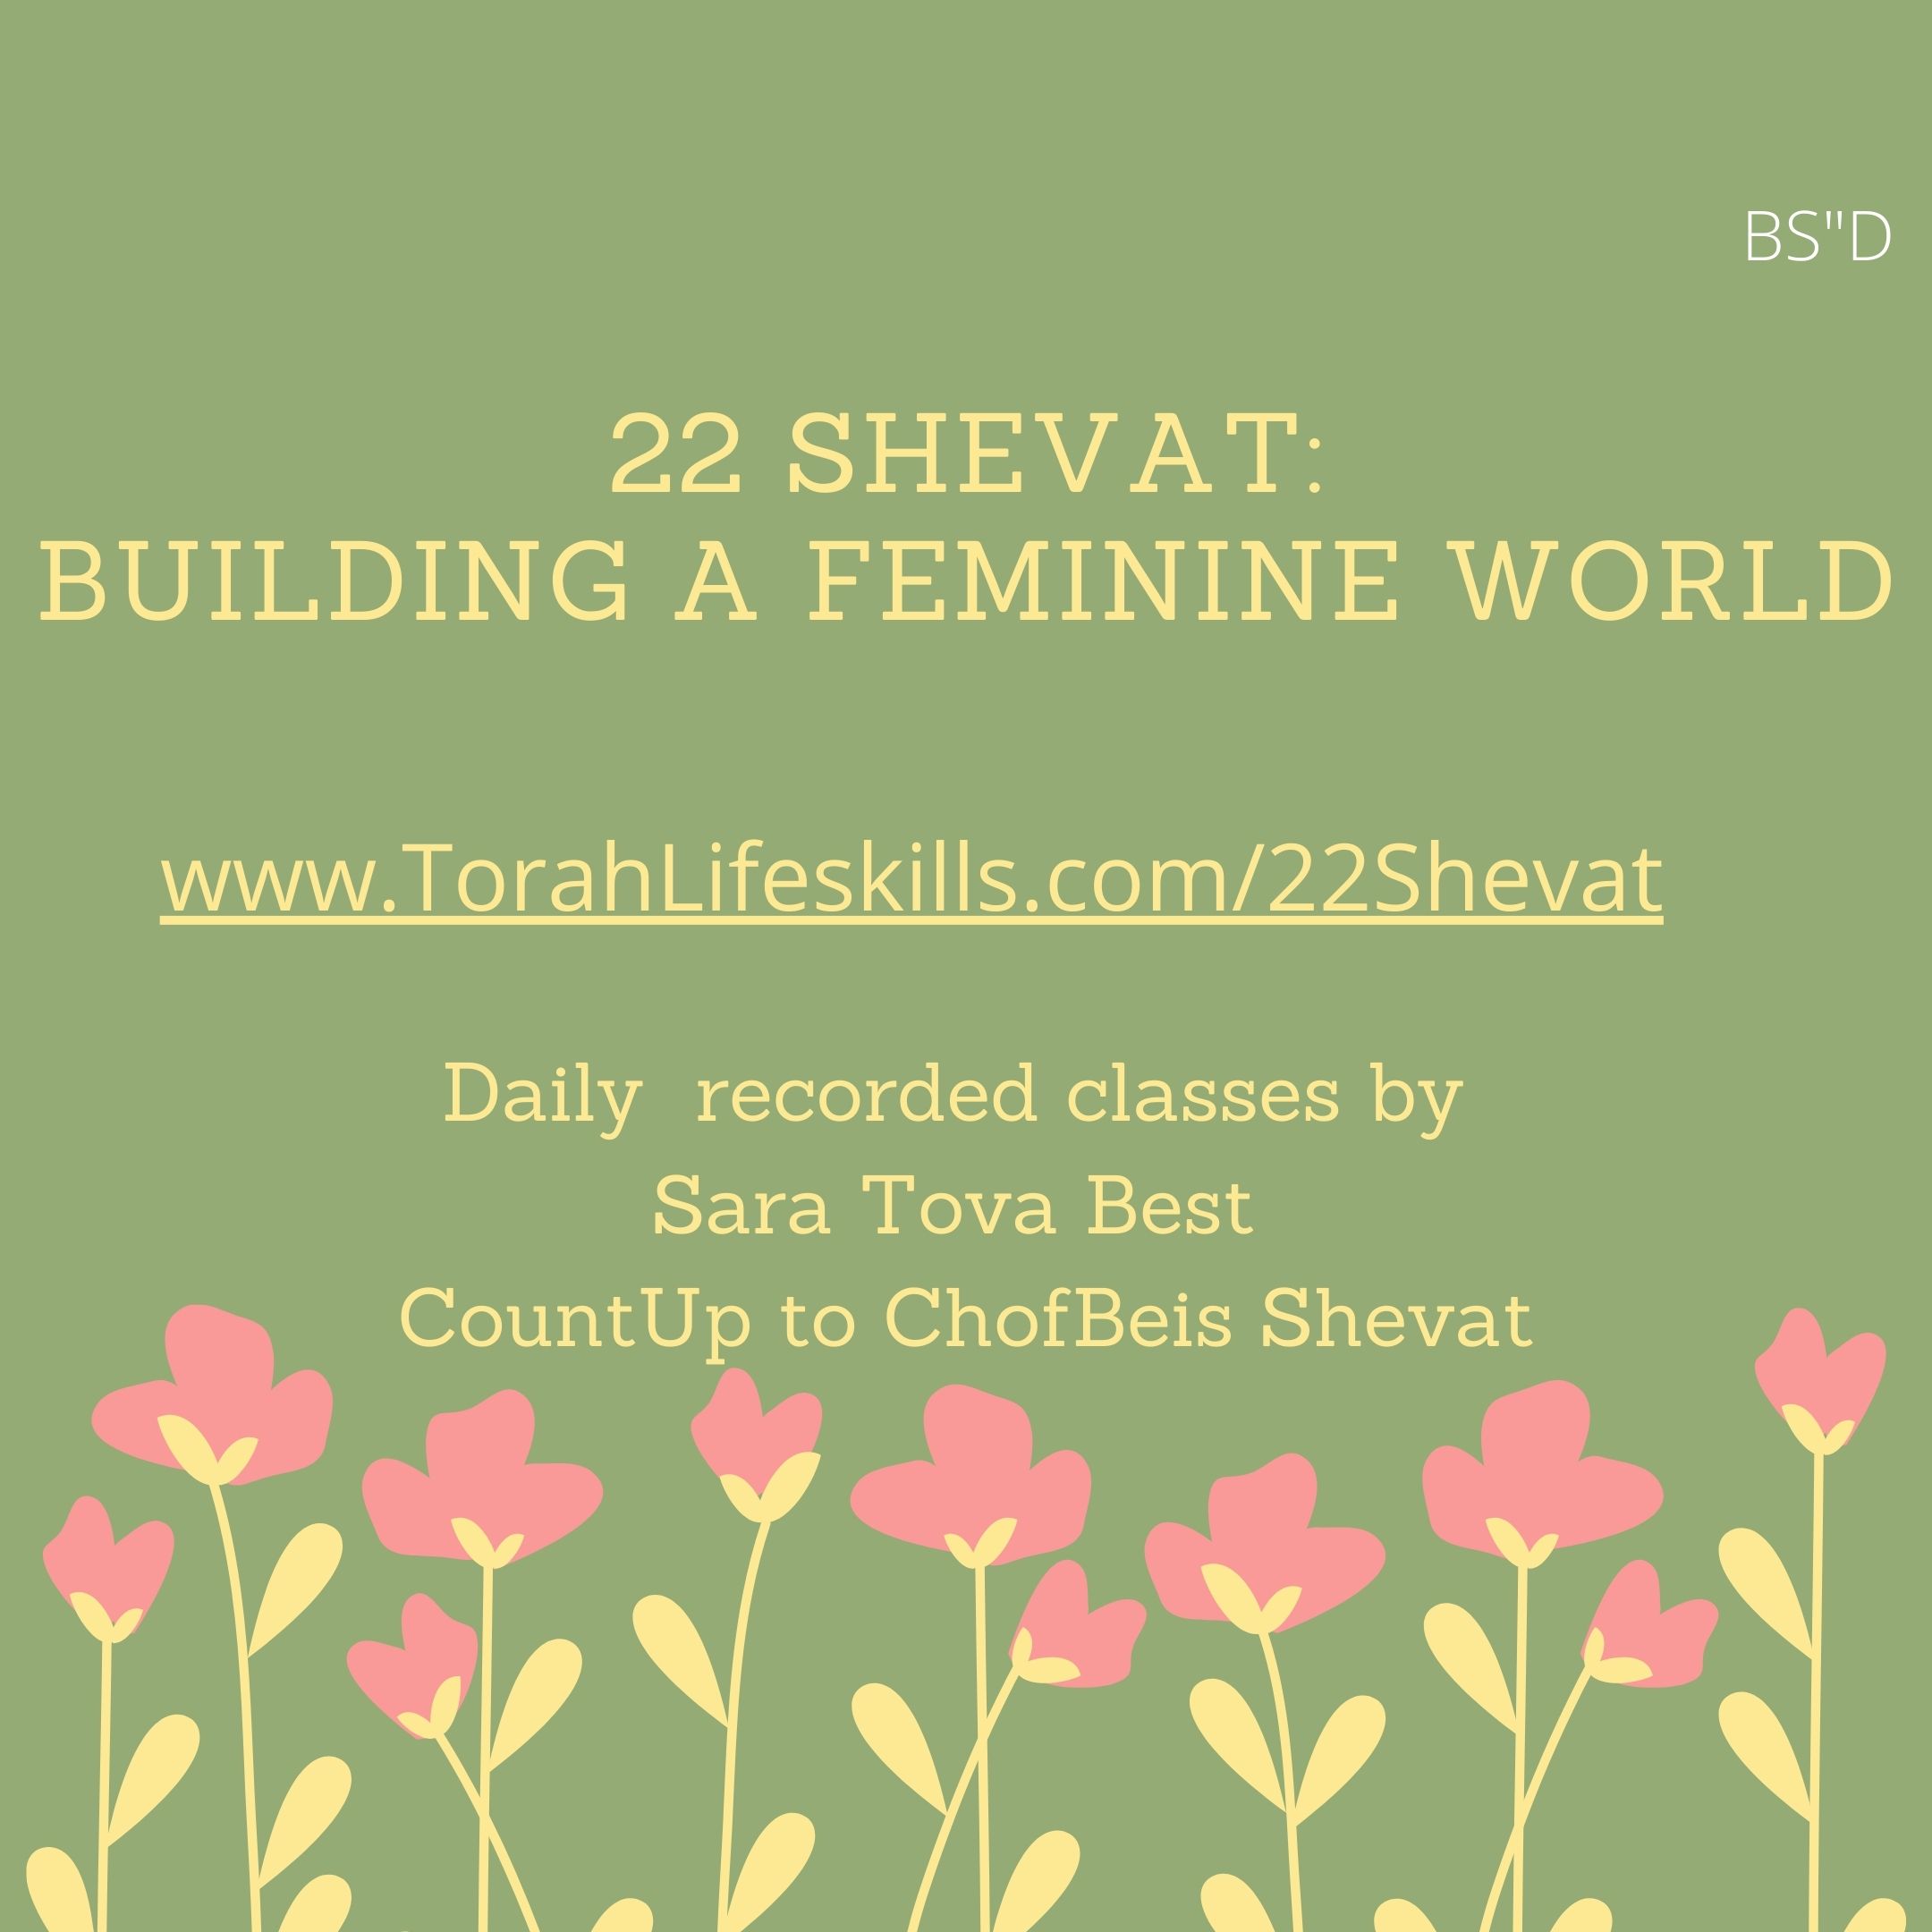 22 Shevat- Where is this day taking us?